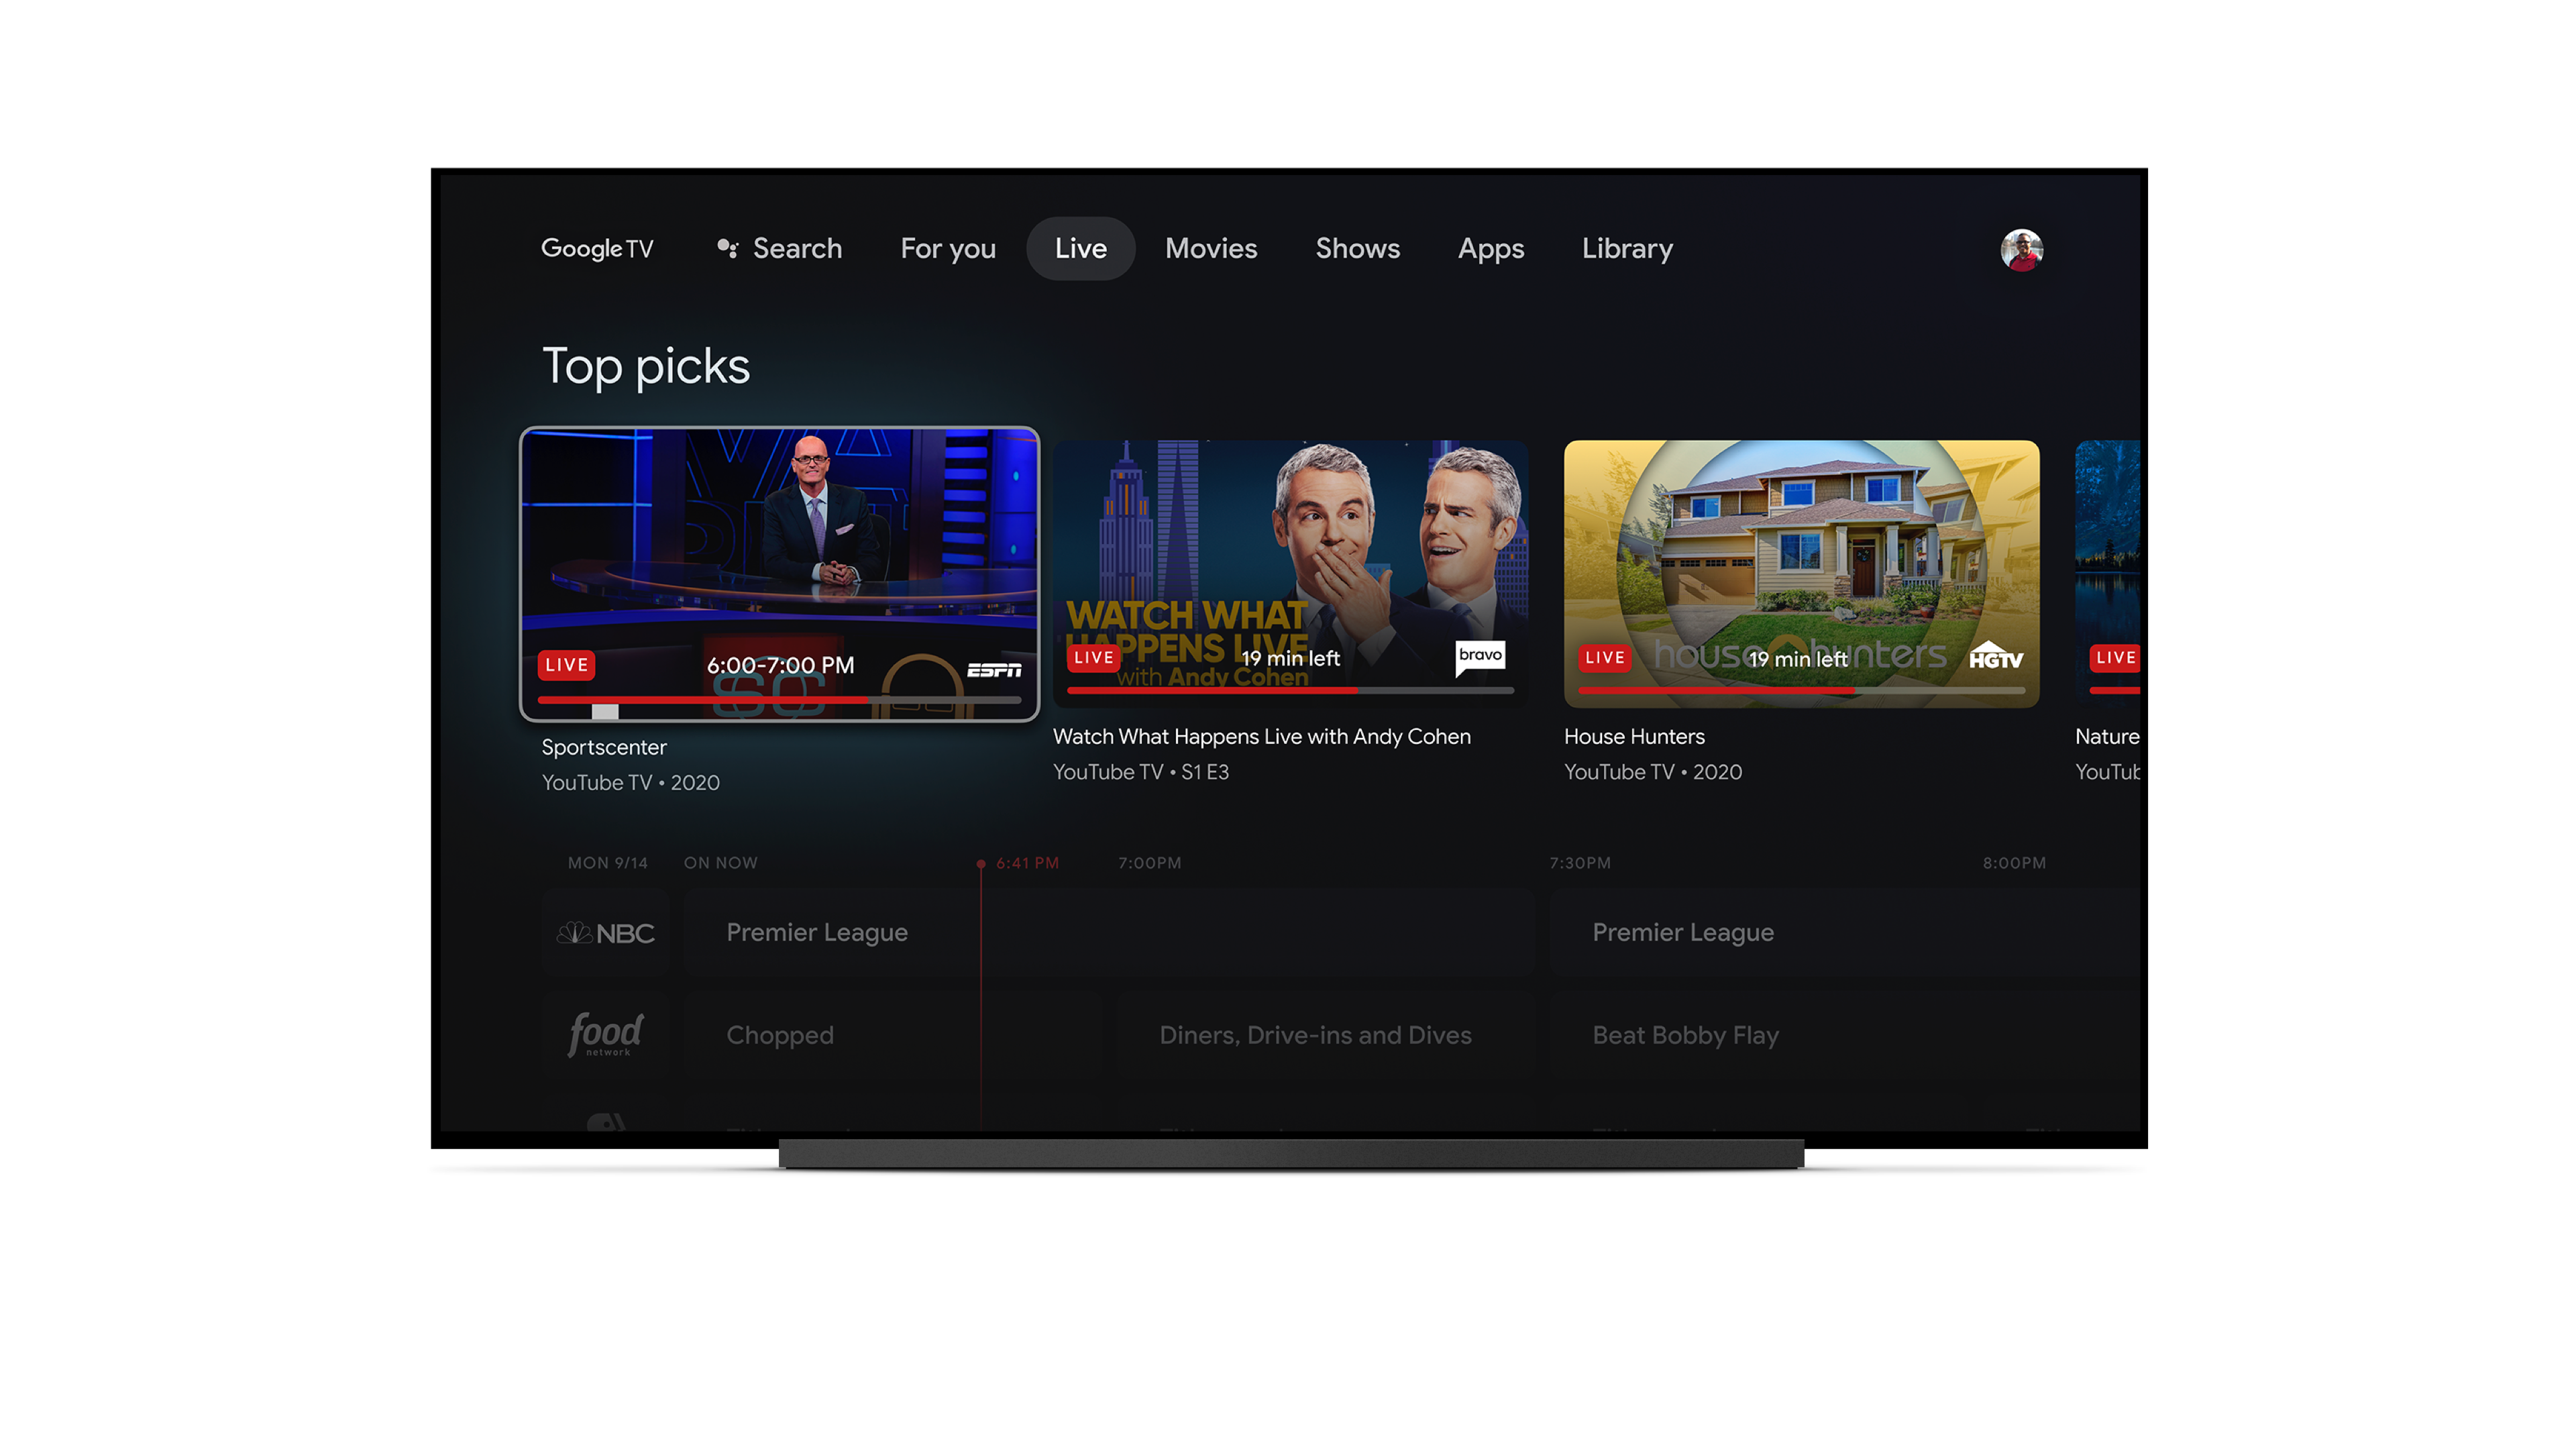 Google TV: Entertainment you love, with help from Google